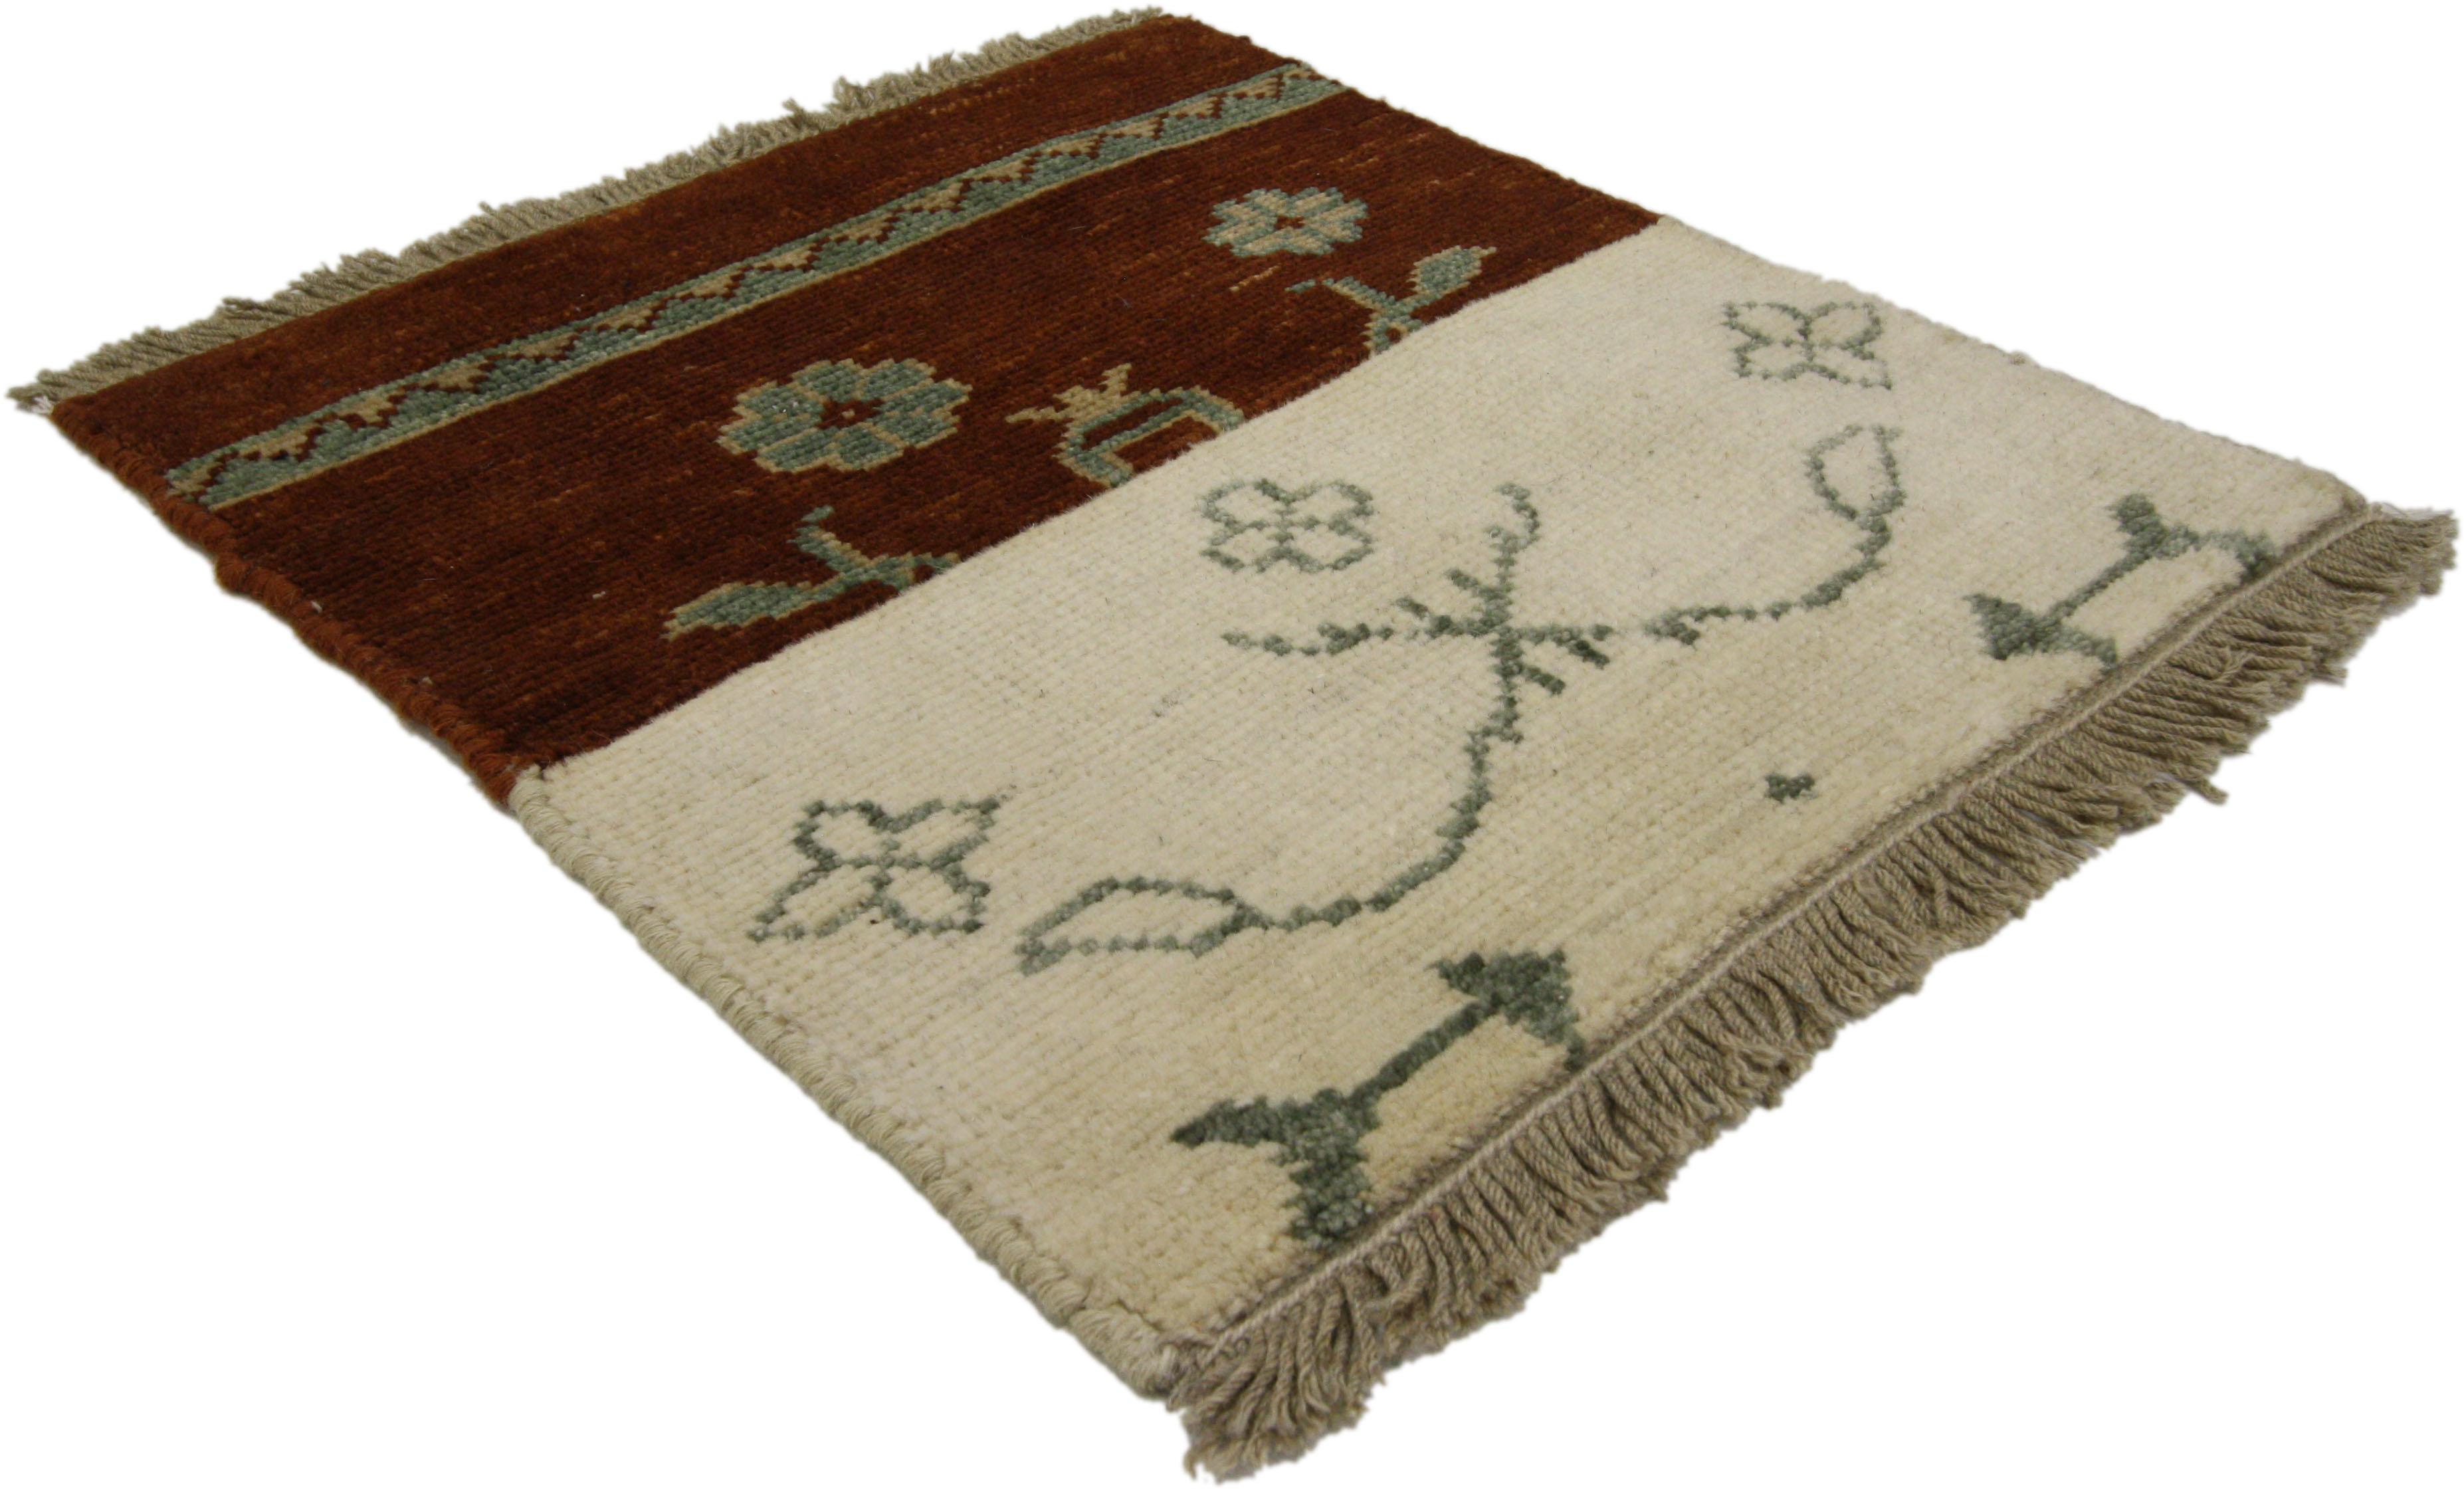 30398, vintage Indian Accent rug with Transitional Farmhouse style, Accent Entry rug. Dainty floral details and contrasting colors collide in this hand knotted wool vintage Indian accent rug. Half the rug is a field of cream with three flowers and